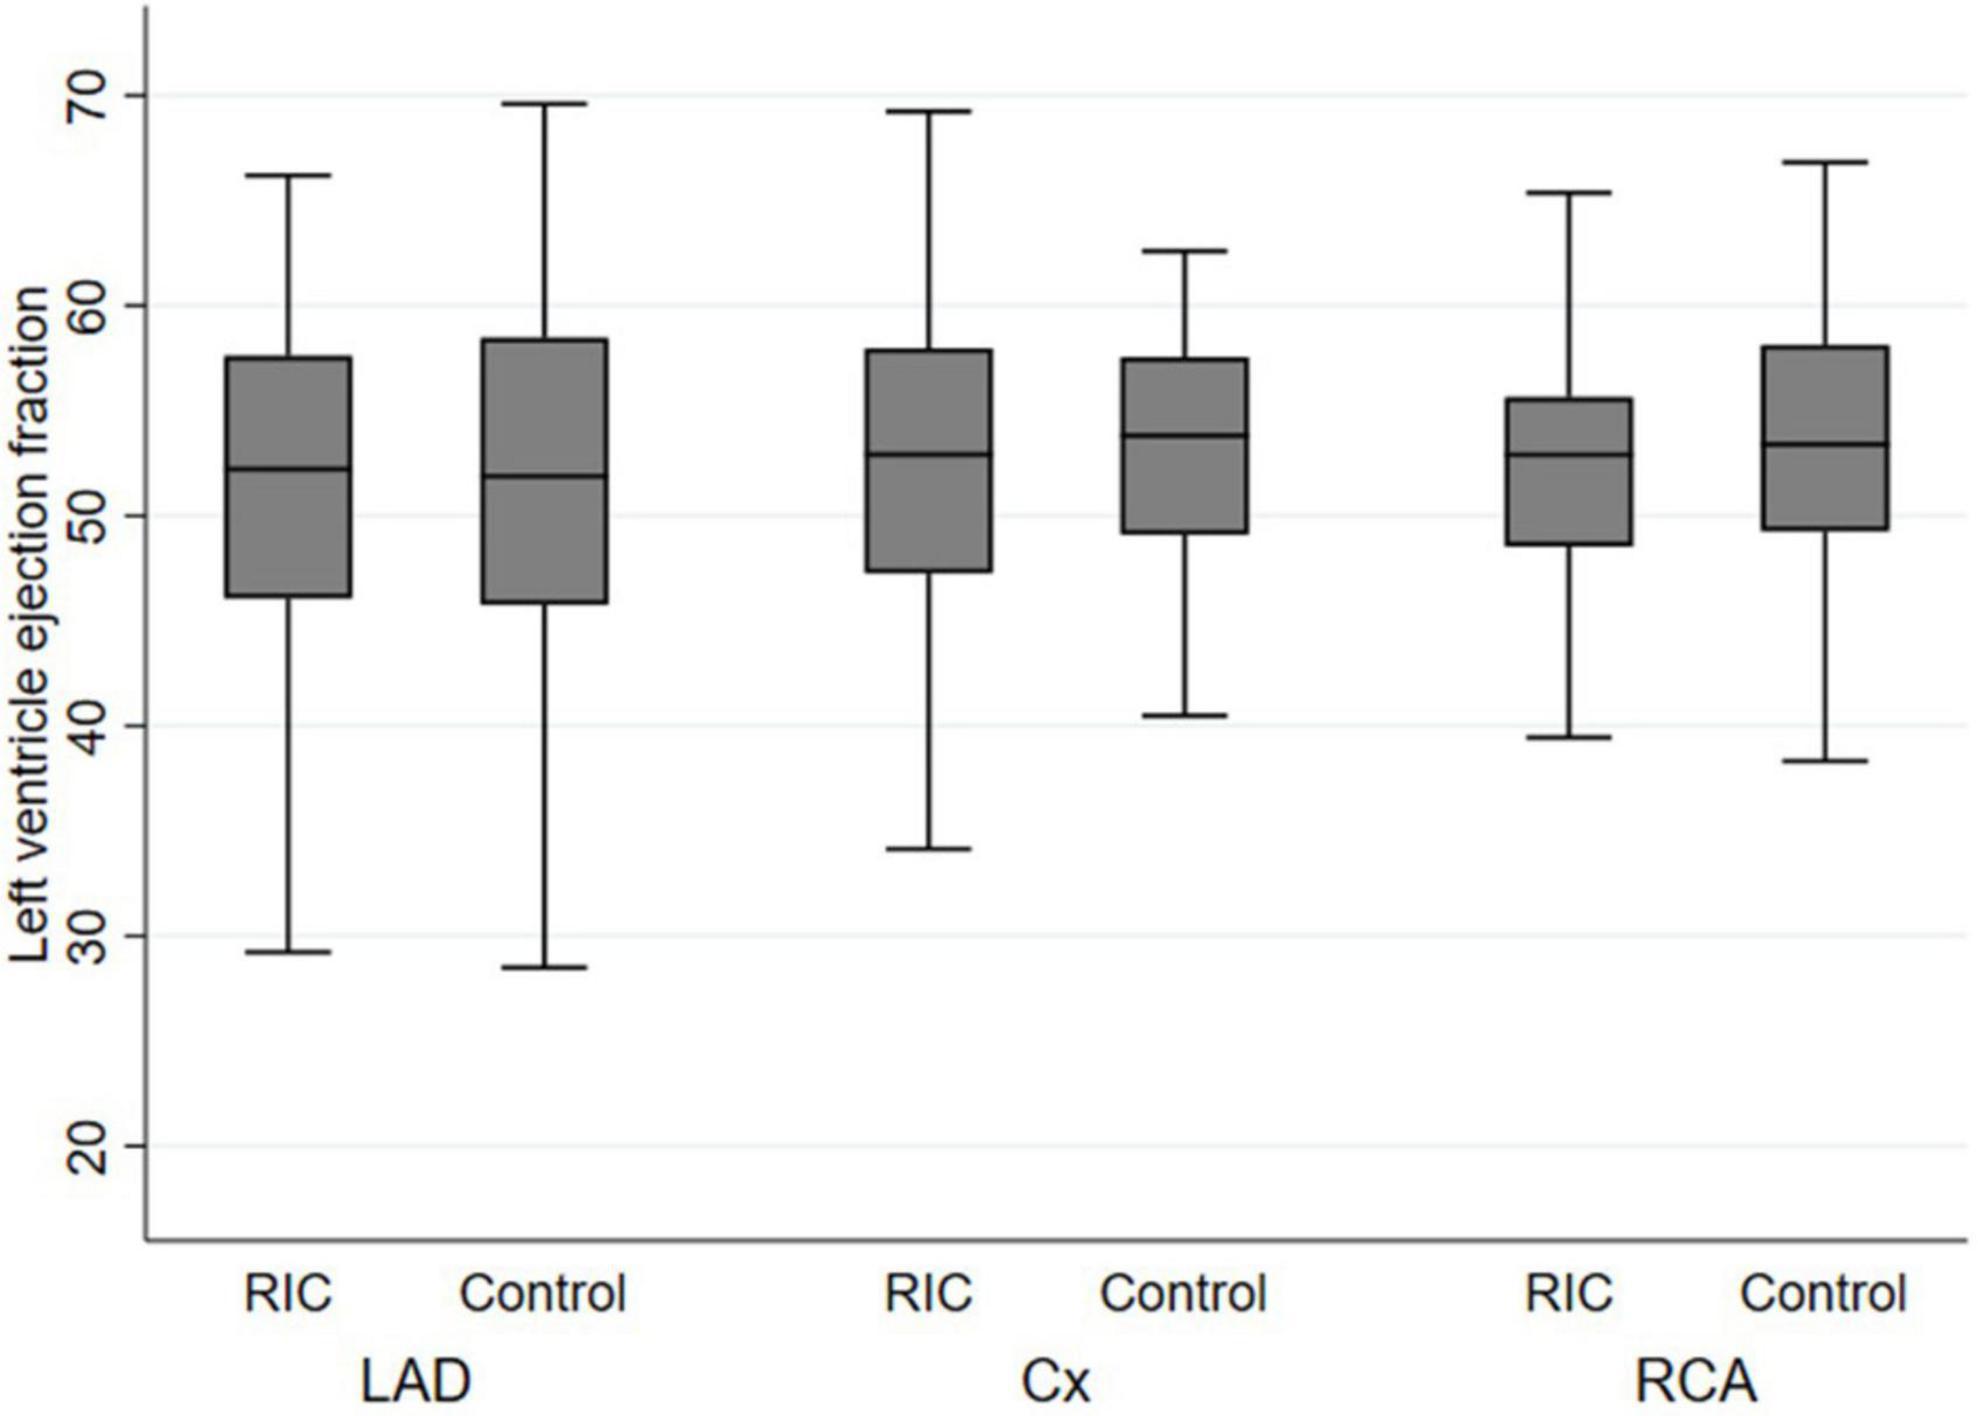 Effect of remote ischaemic conditioning on left ventricular function in ST-segment elevation myocardial infarction patients: The CONDI-2 echocardiographic sub-study